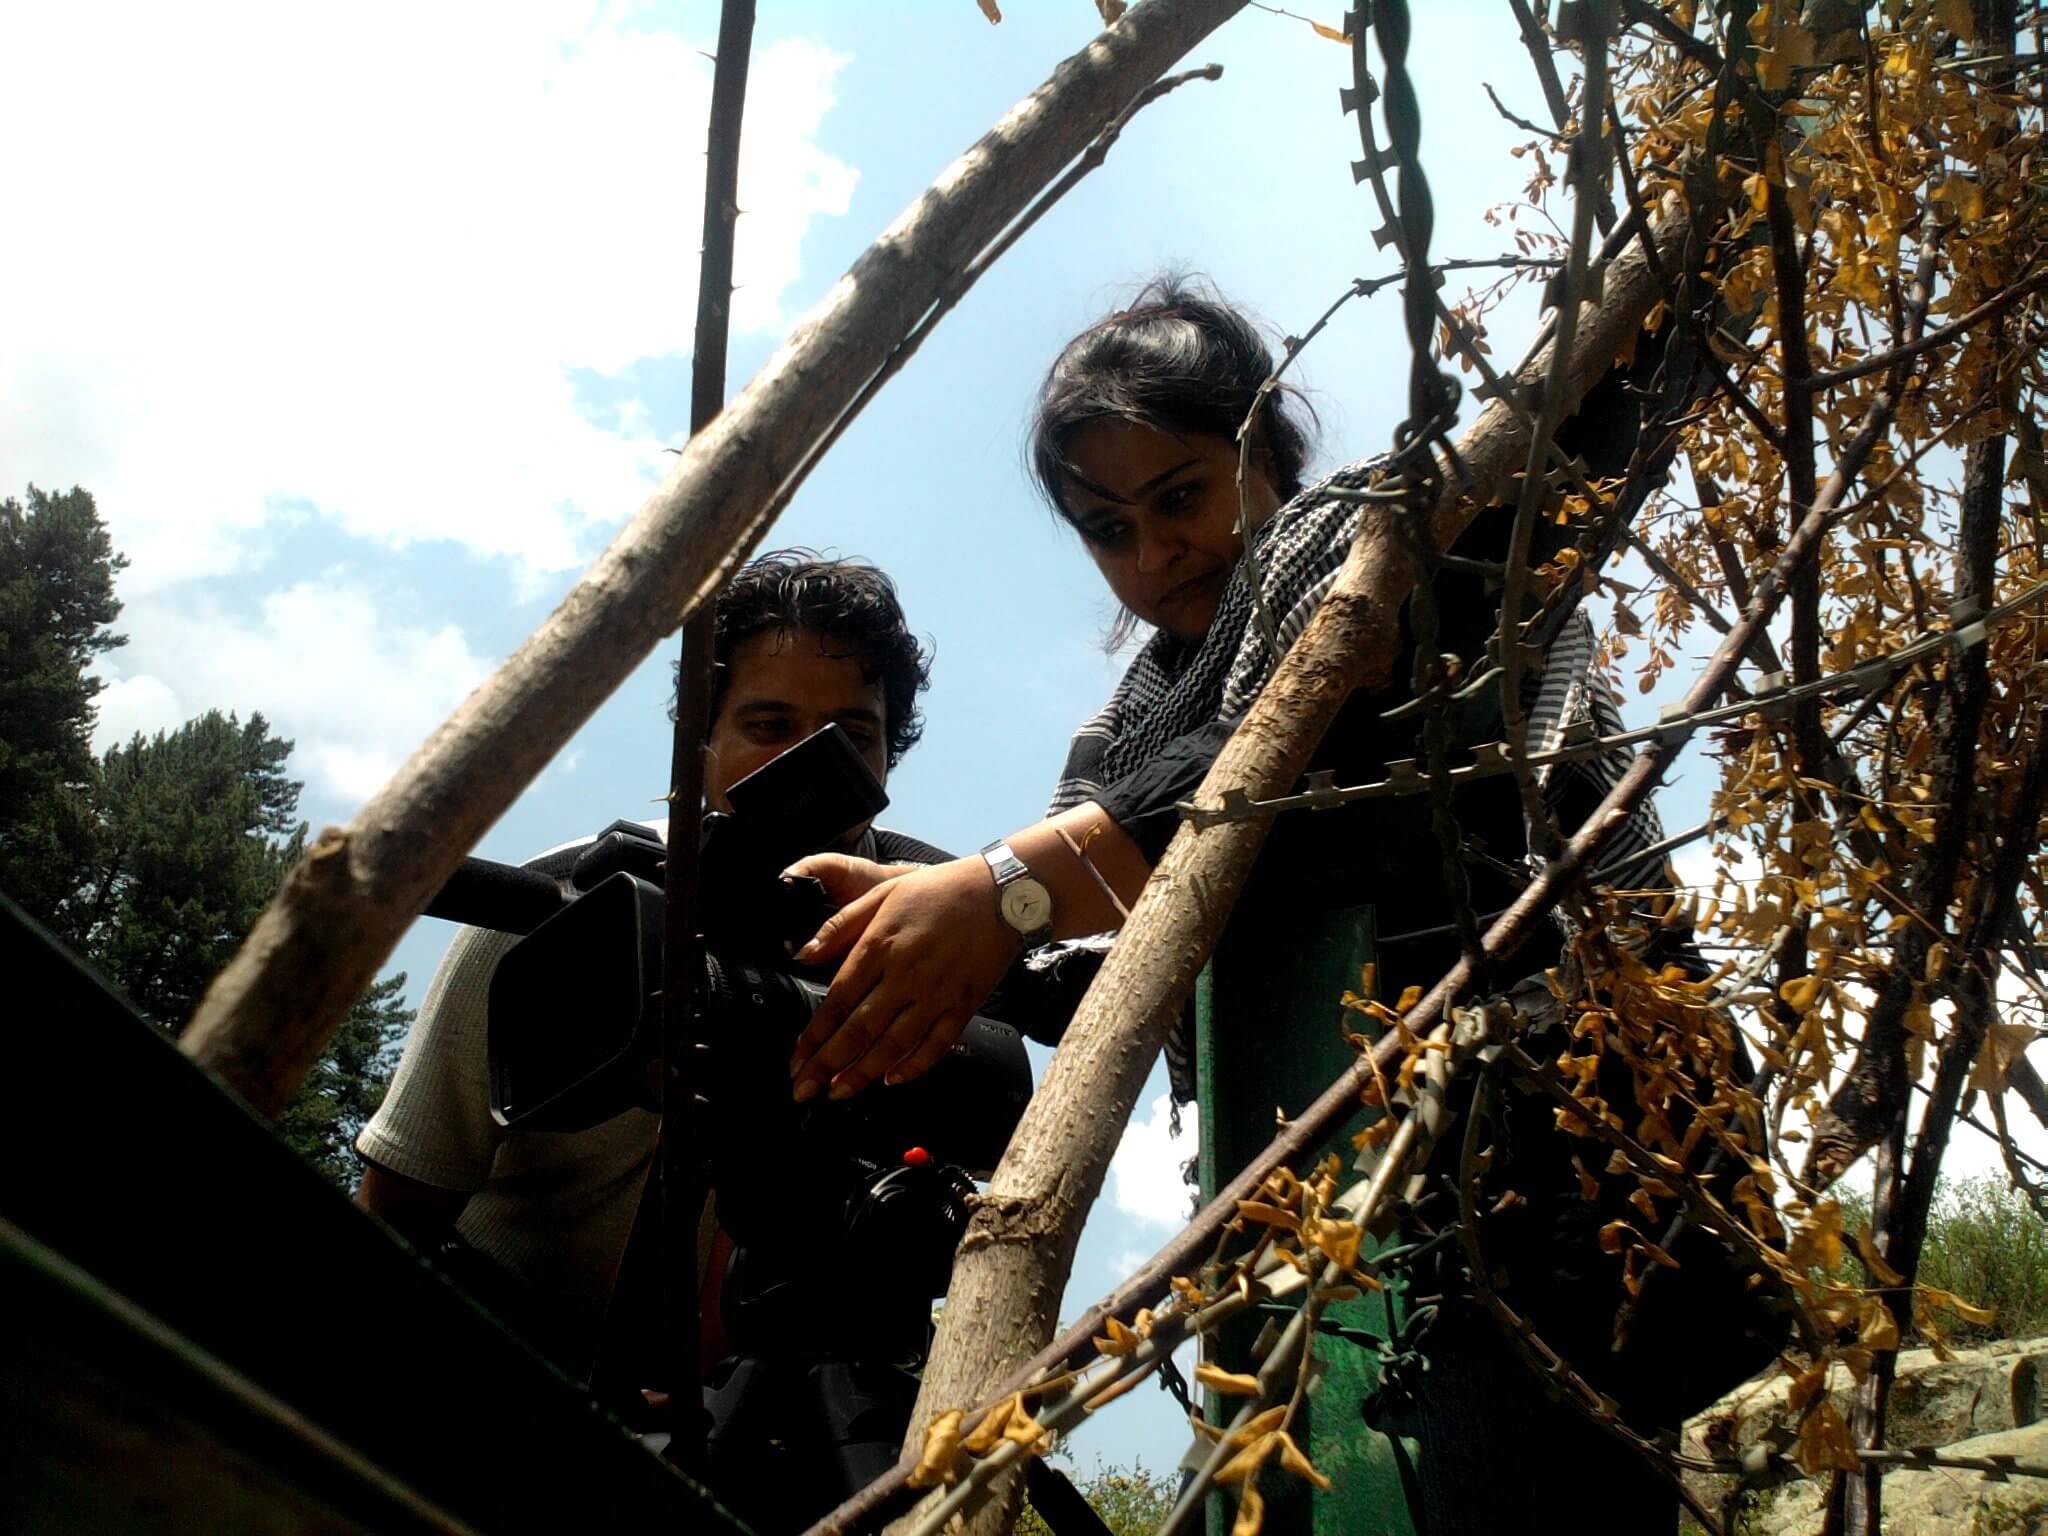 Production still from I Never Left. A woman positions a camera on a tripod. She is seen from a low angle in between branches. A man is looking on.